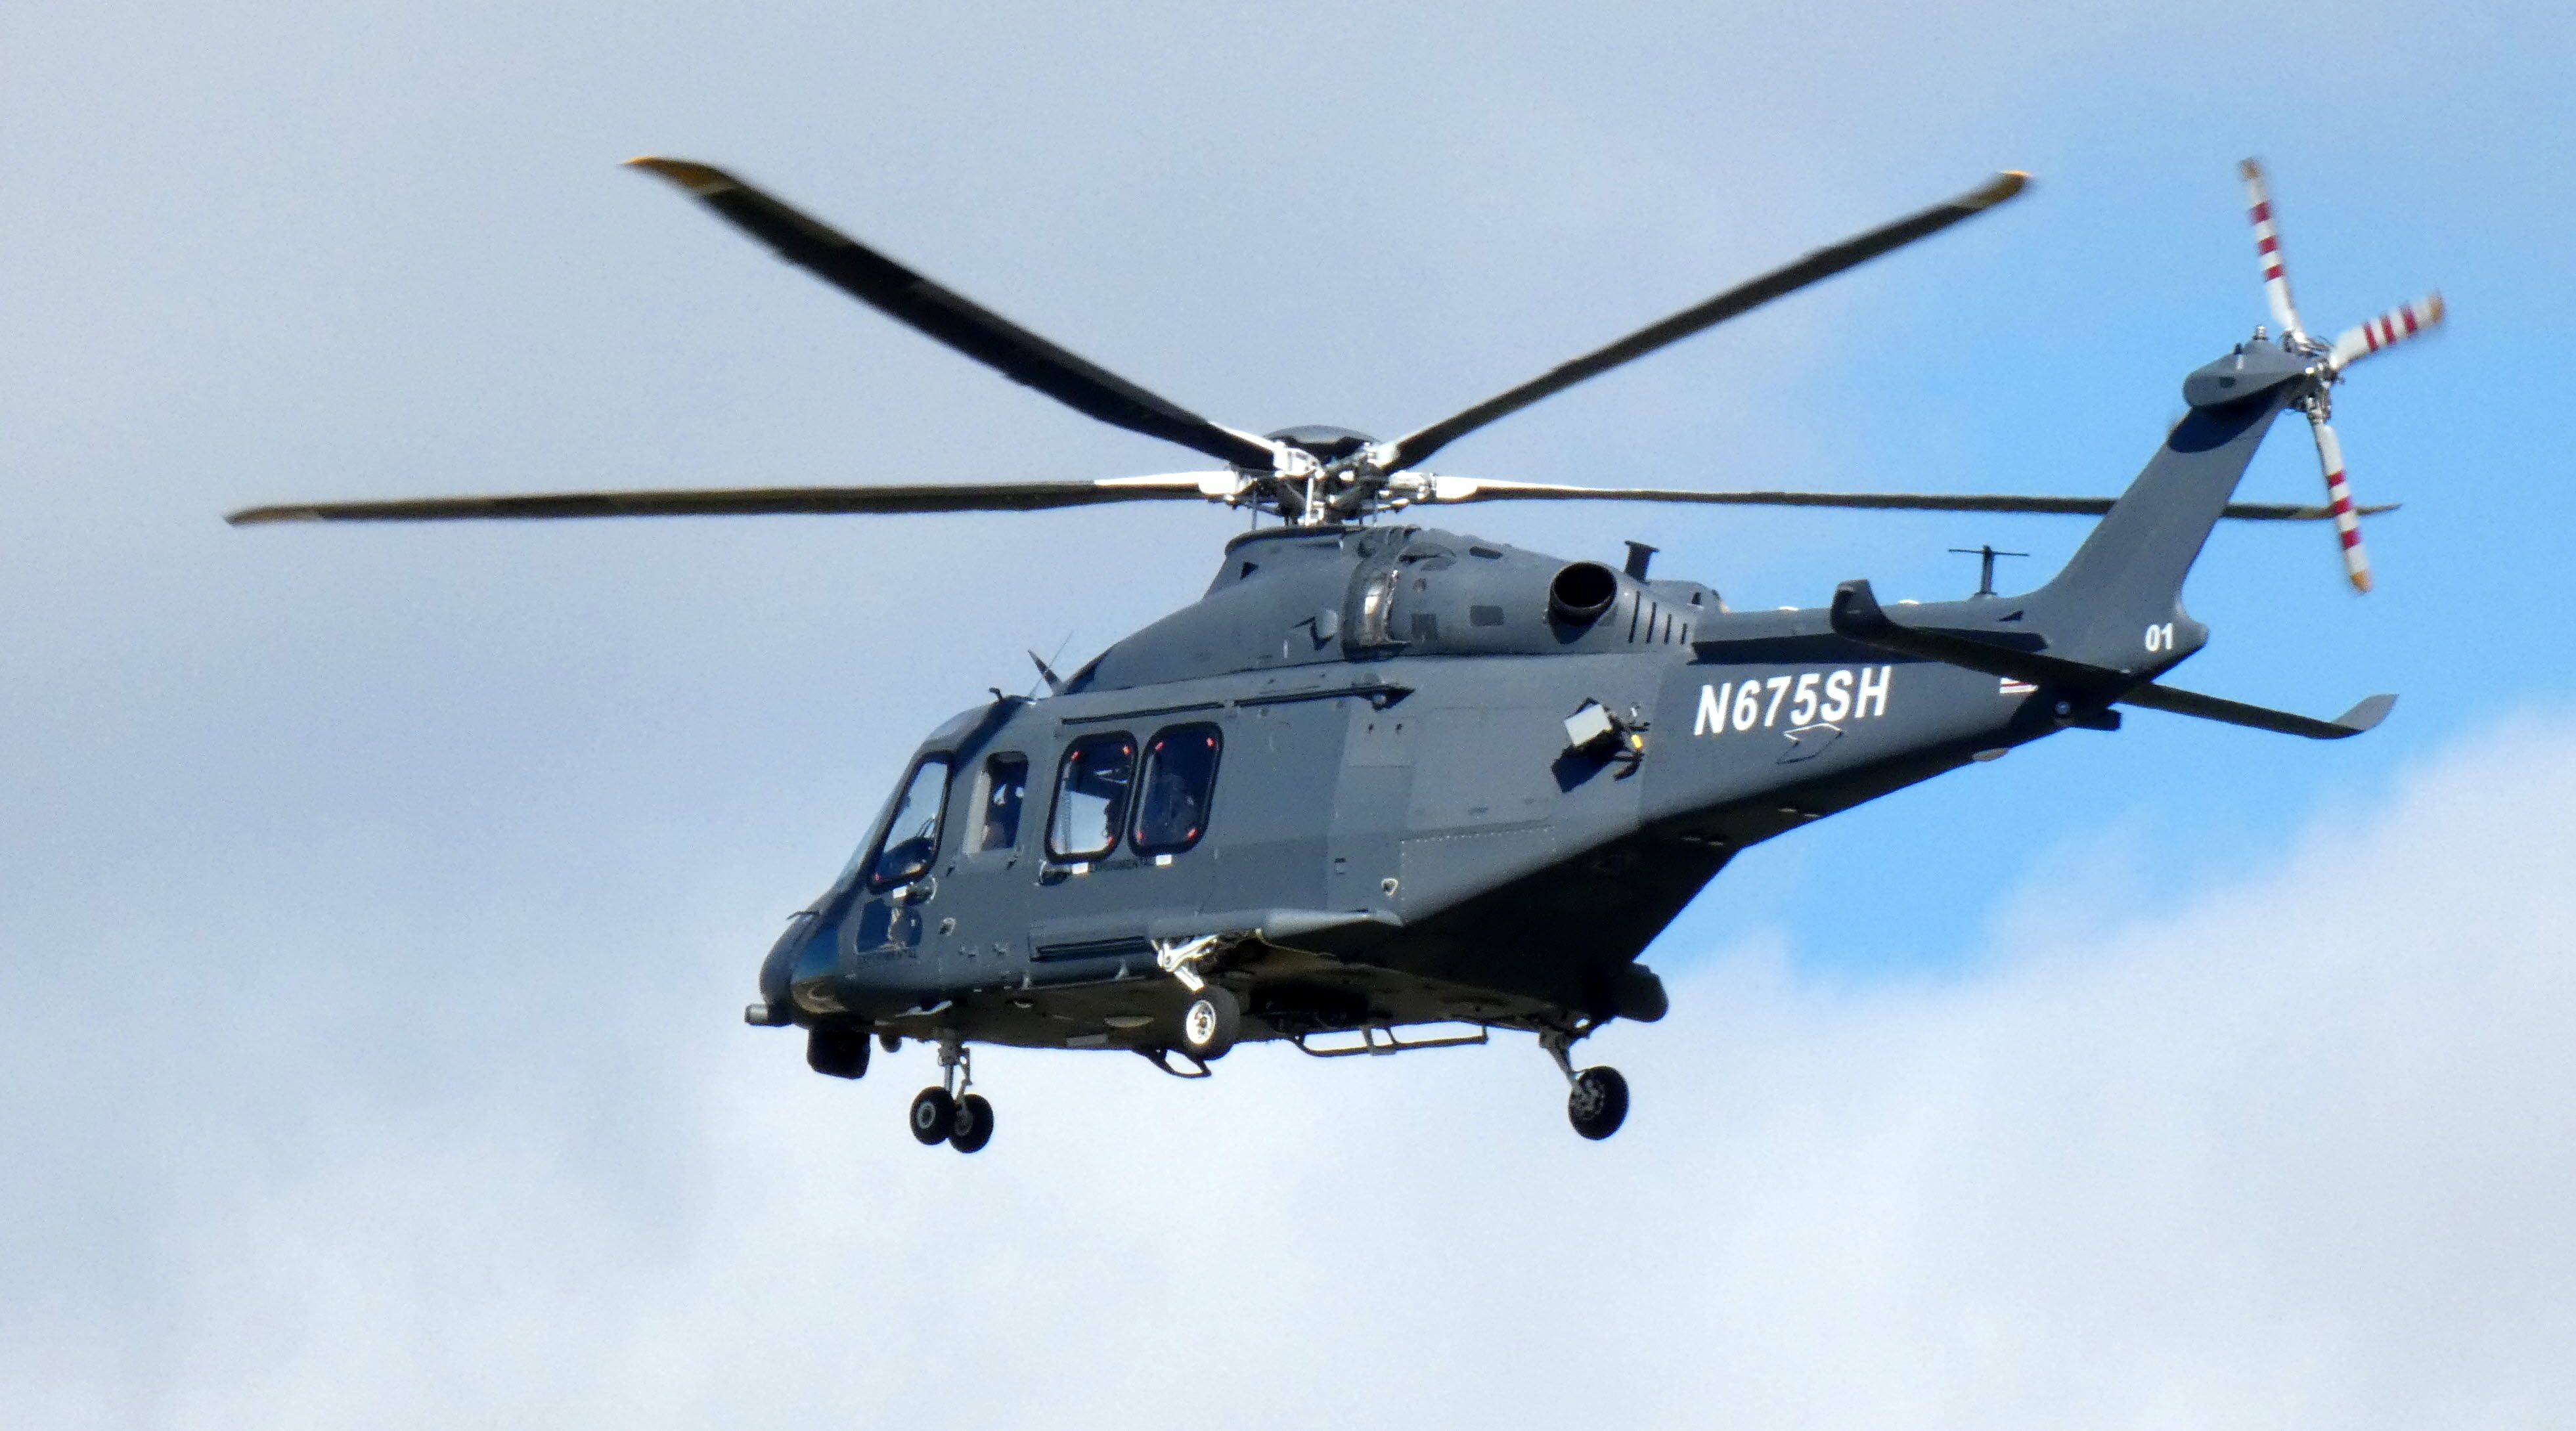 N675SH — - Making a low pass is this 2019 AgustaWestland MH-139A Grey Wolf Rotorcraft from the Autumn of 2020.